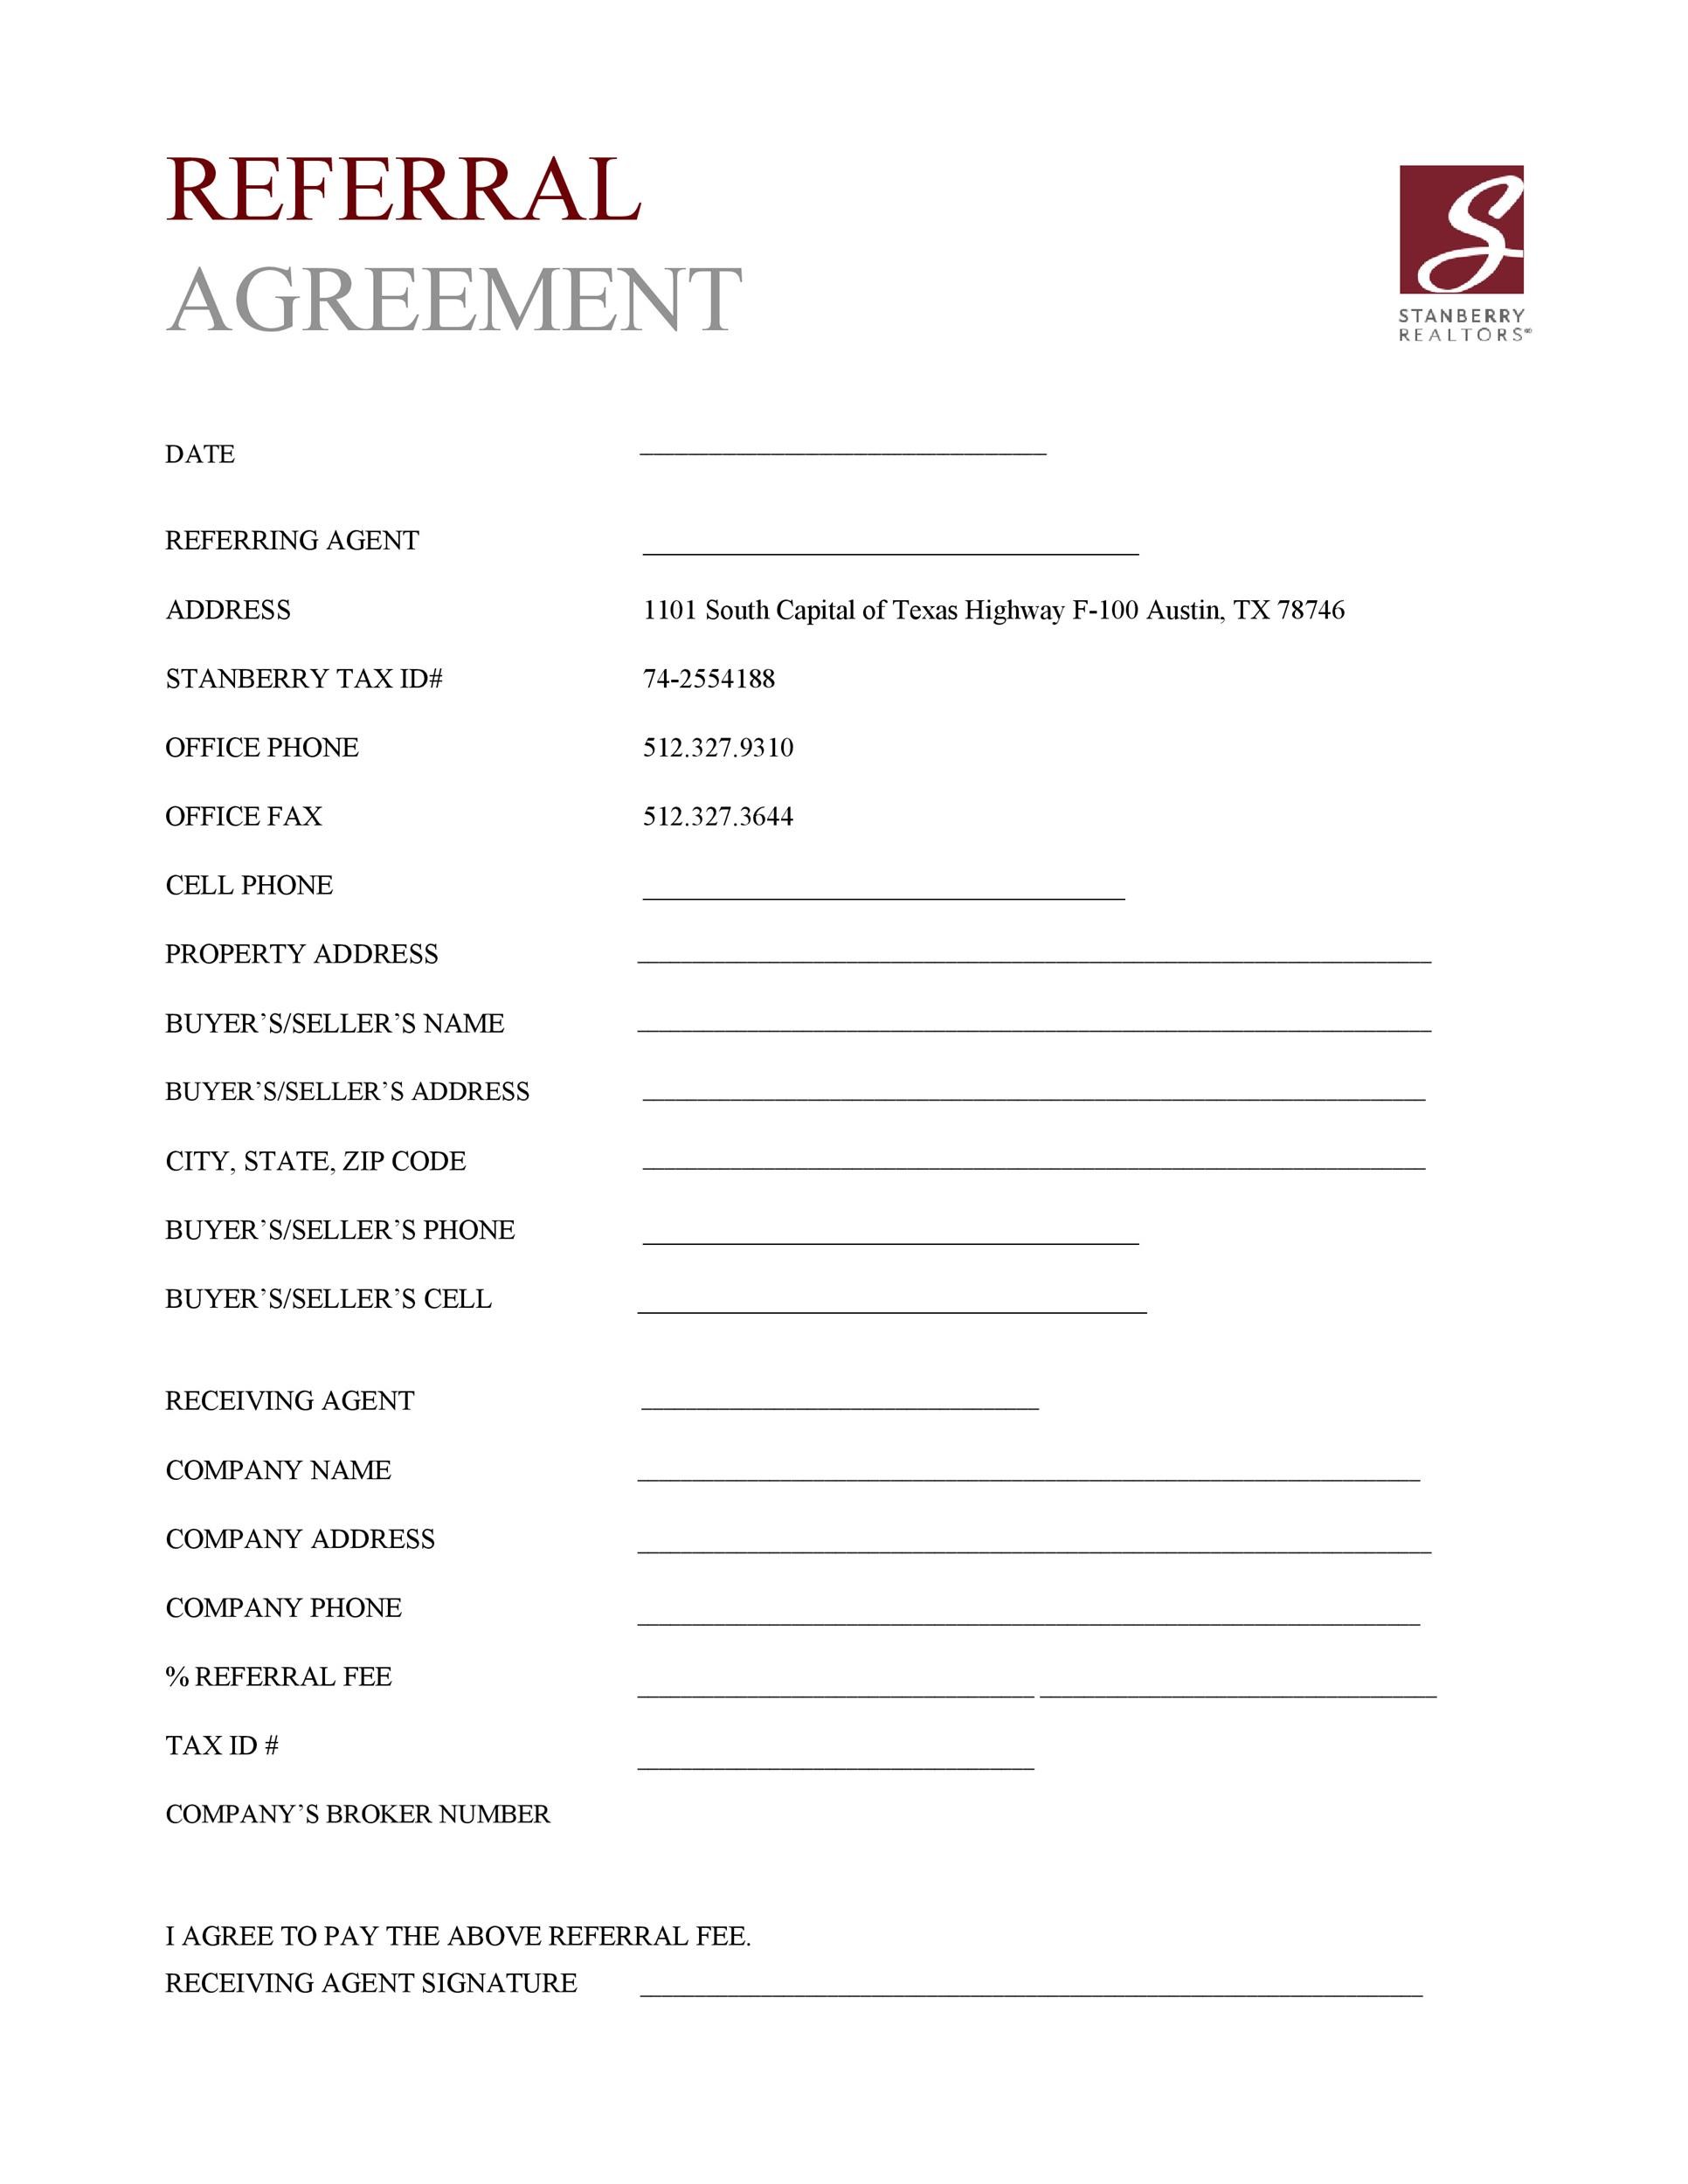 Free referral agreement template 38